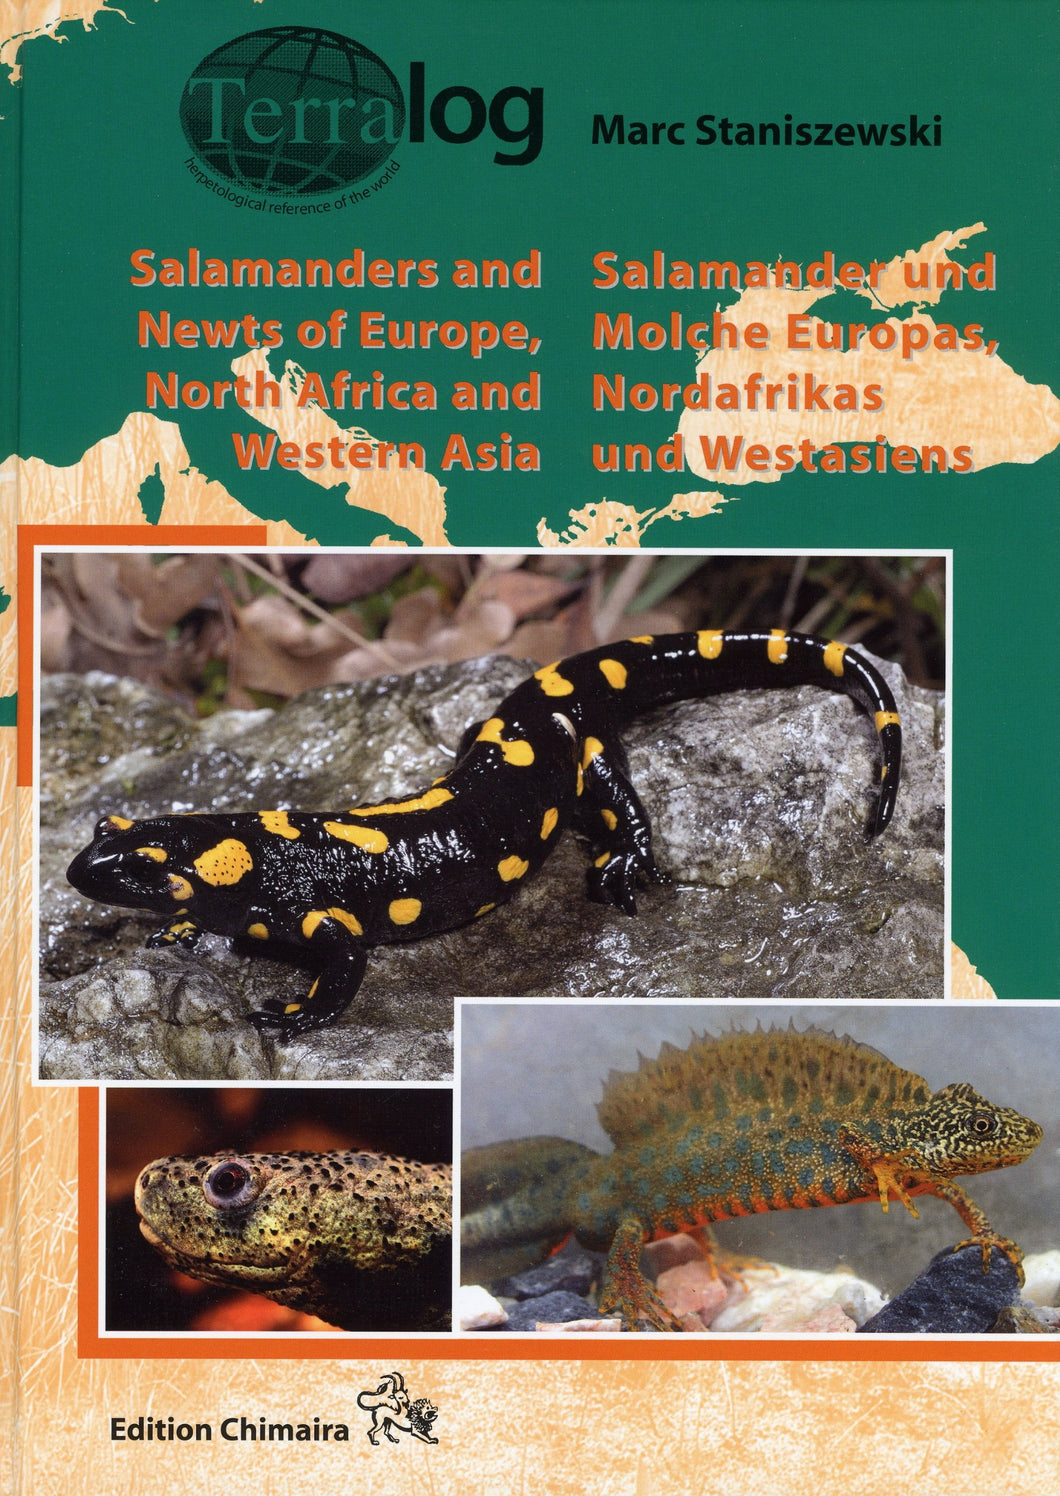 TERRALOG: Salamanders and Newts of Europe, North Africa and Western Asia